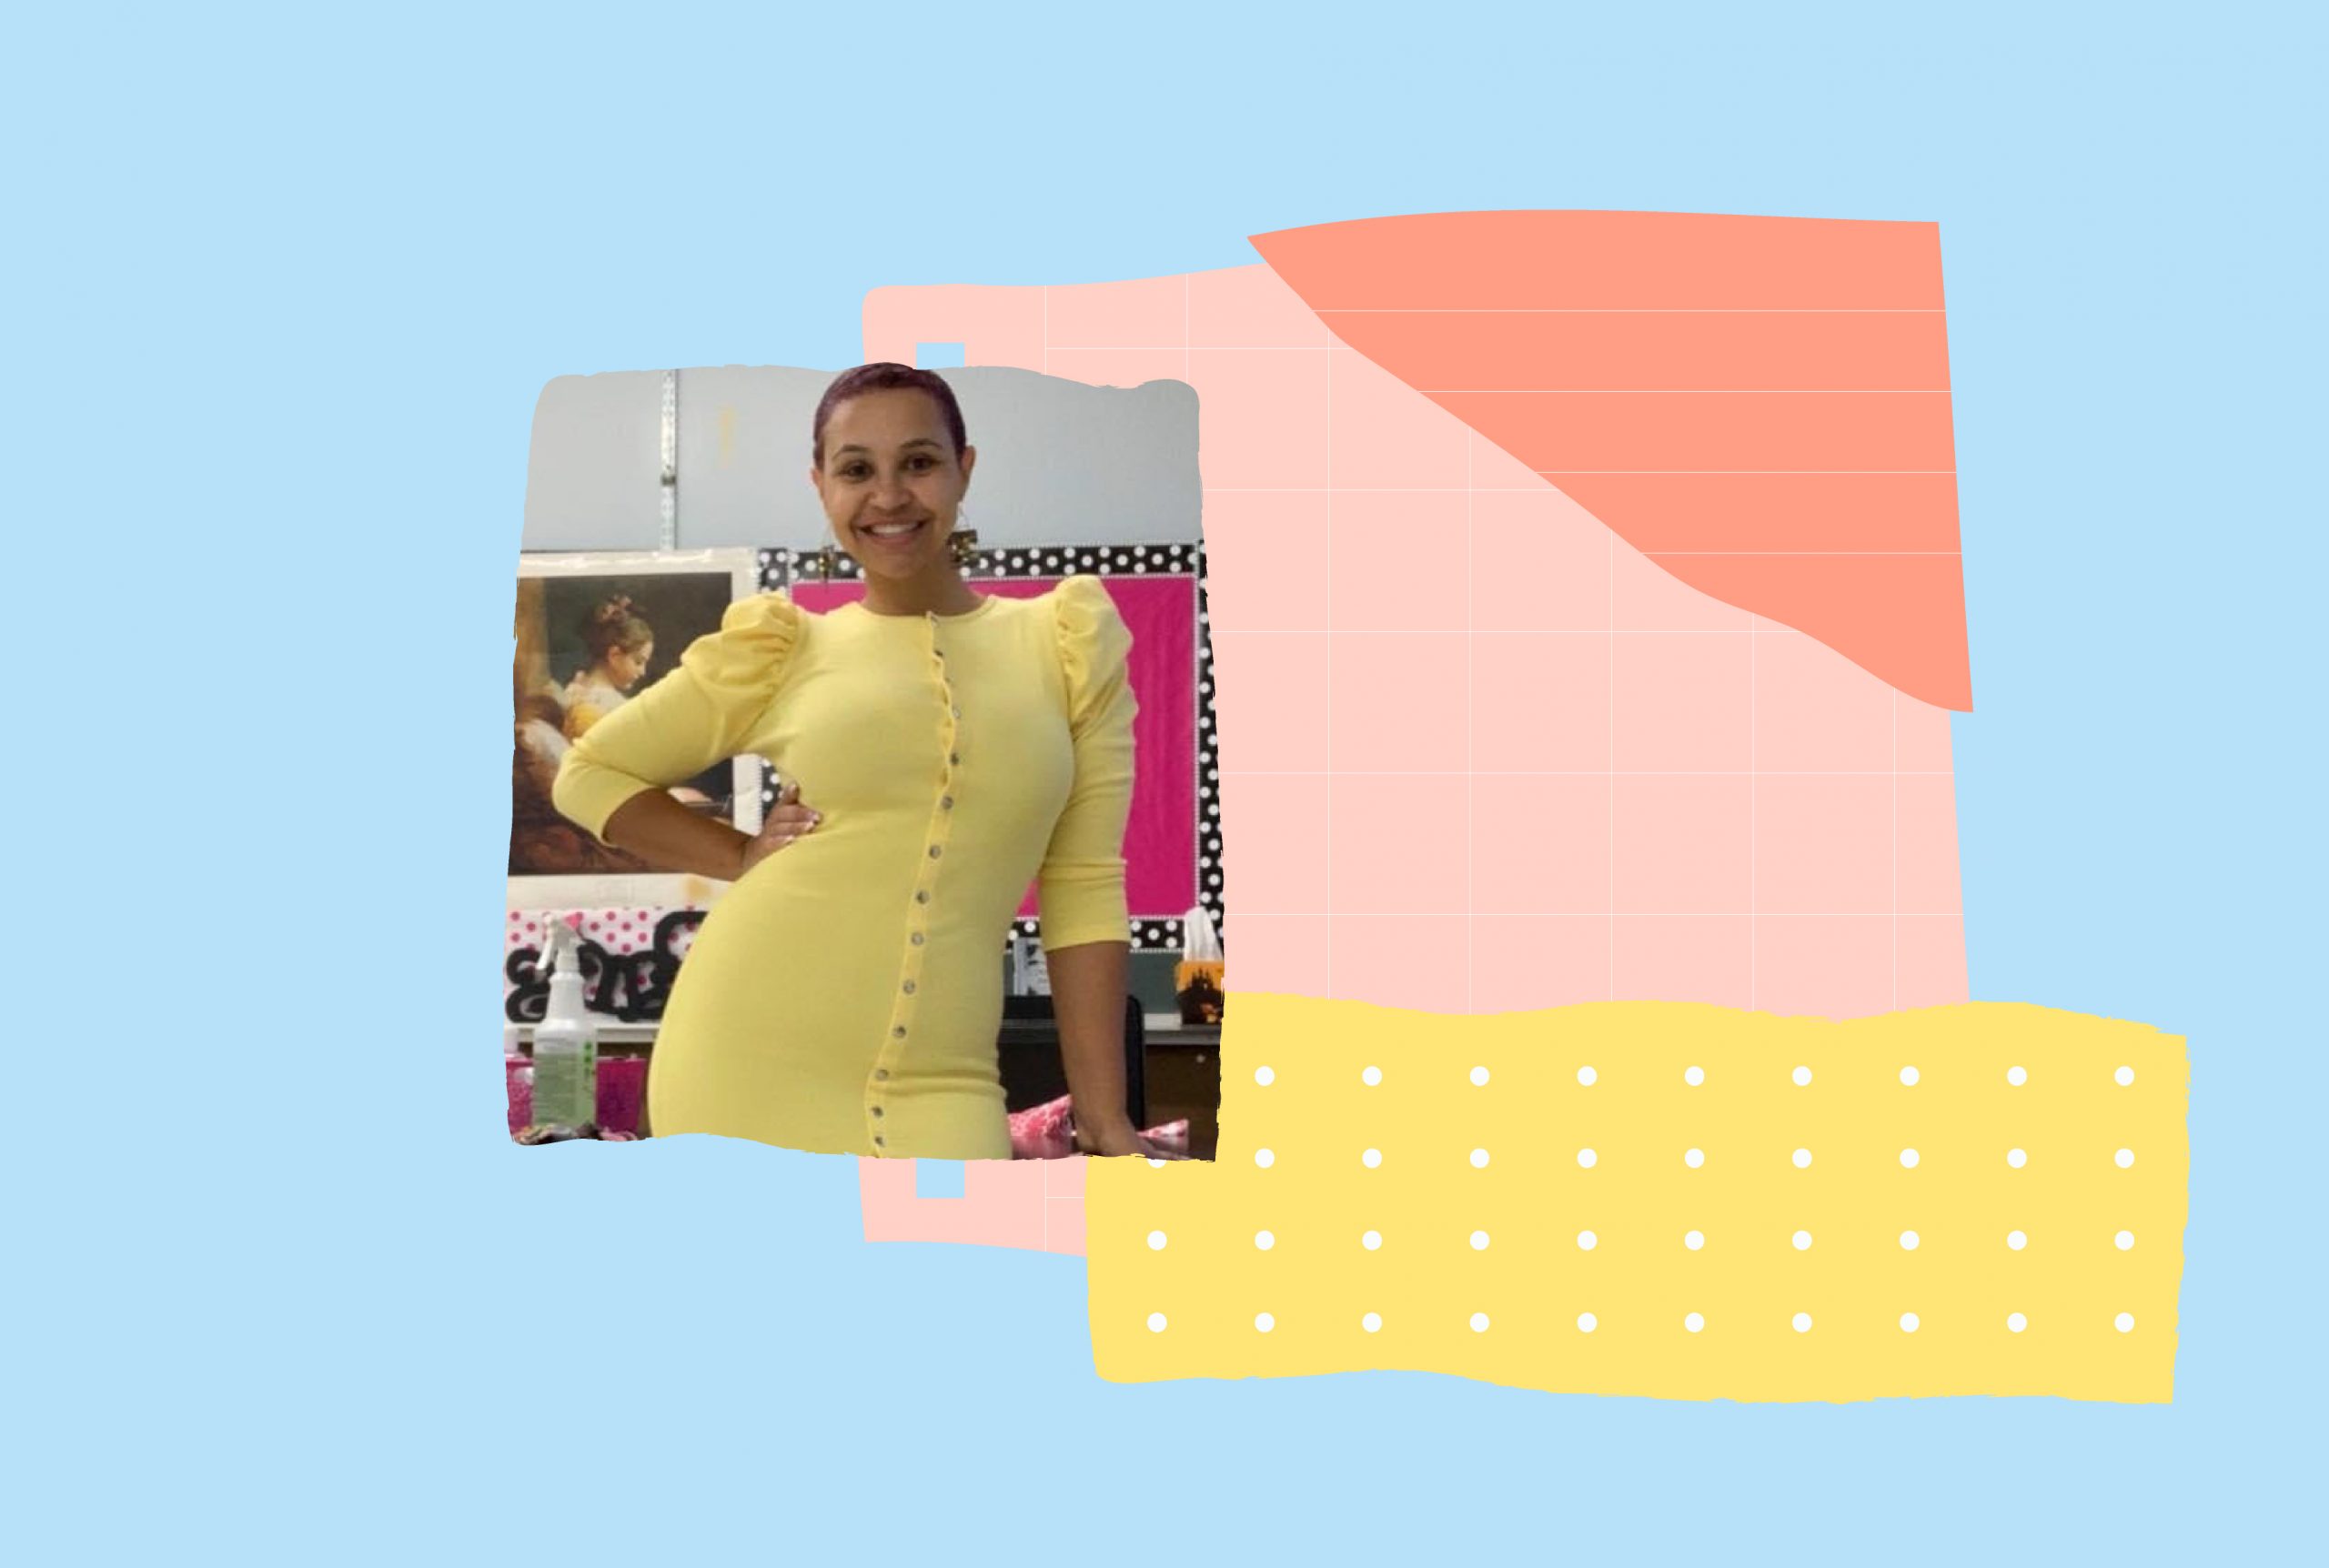 An image of Alyssa Rose in a yellow dress smiling at the camera. The image is on a pink, yellow and blue backdrop.